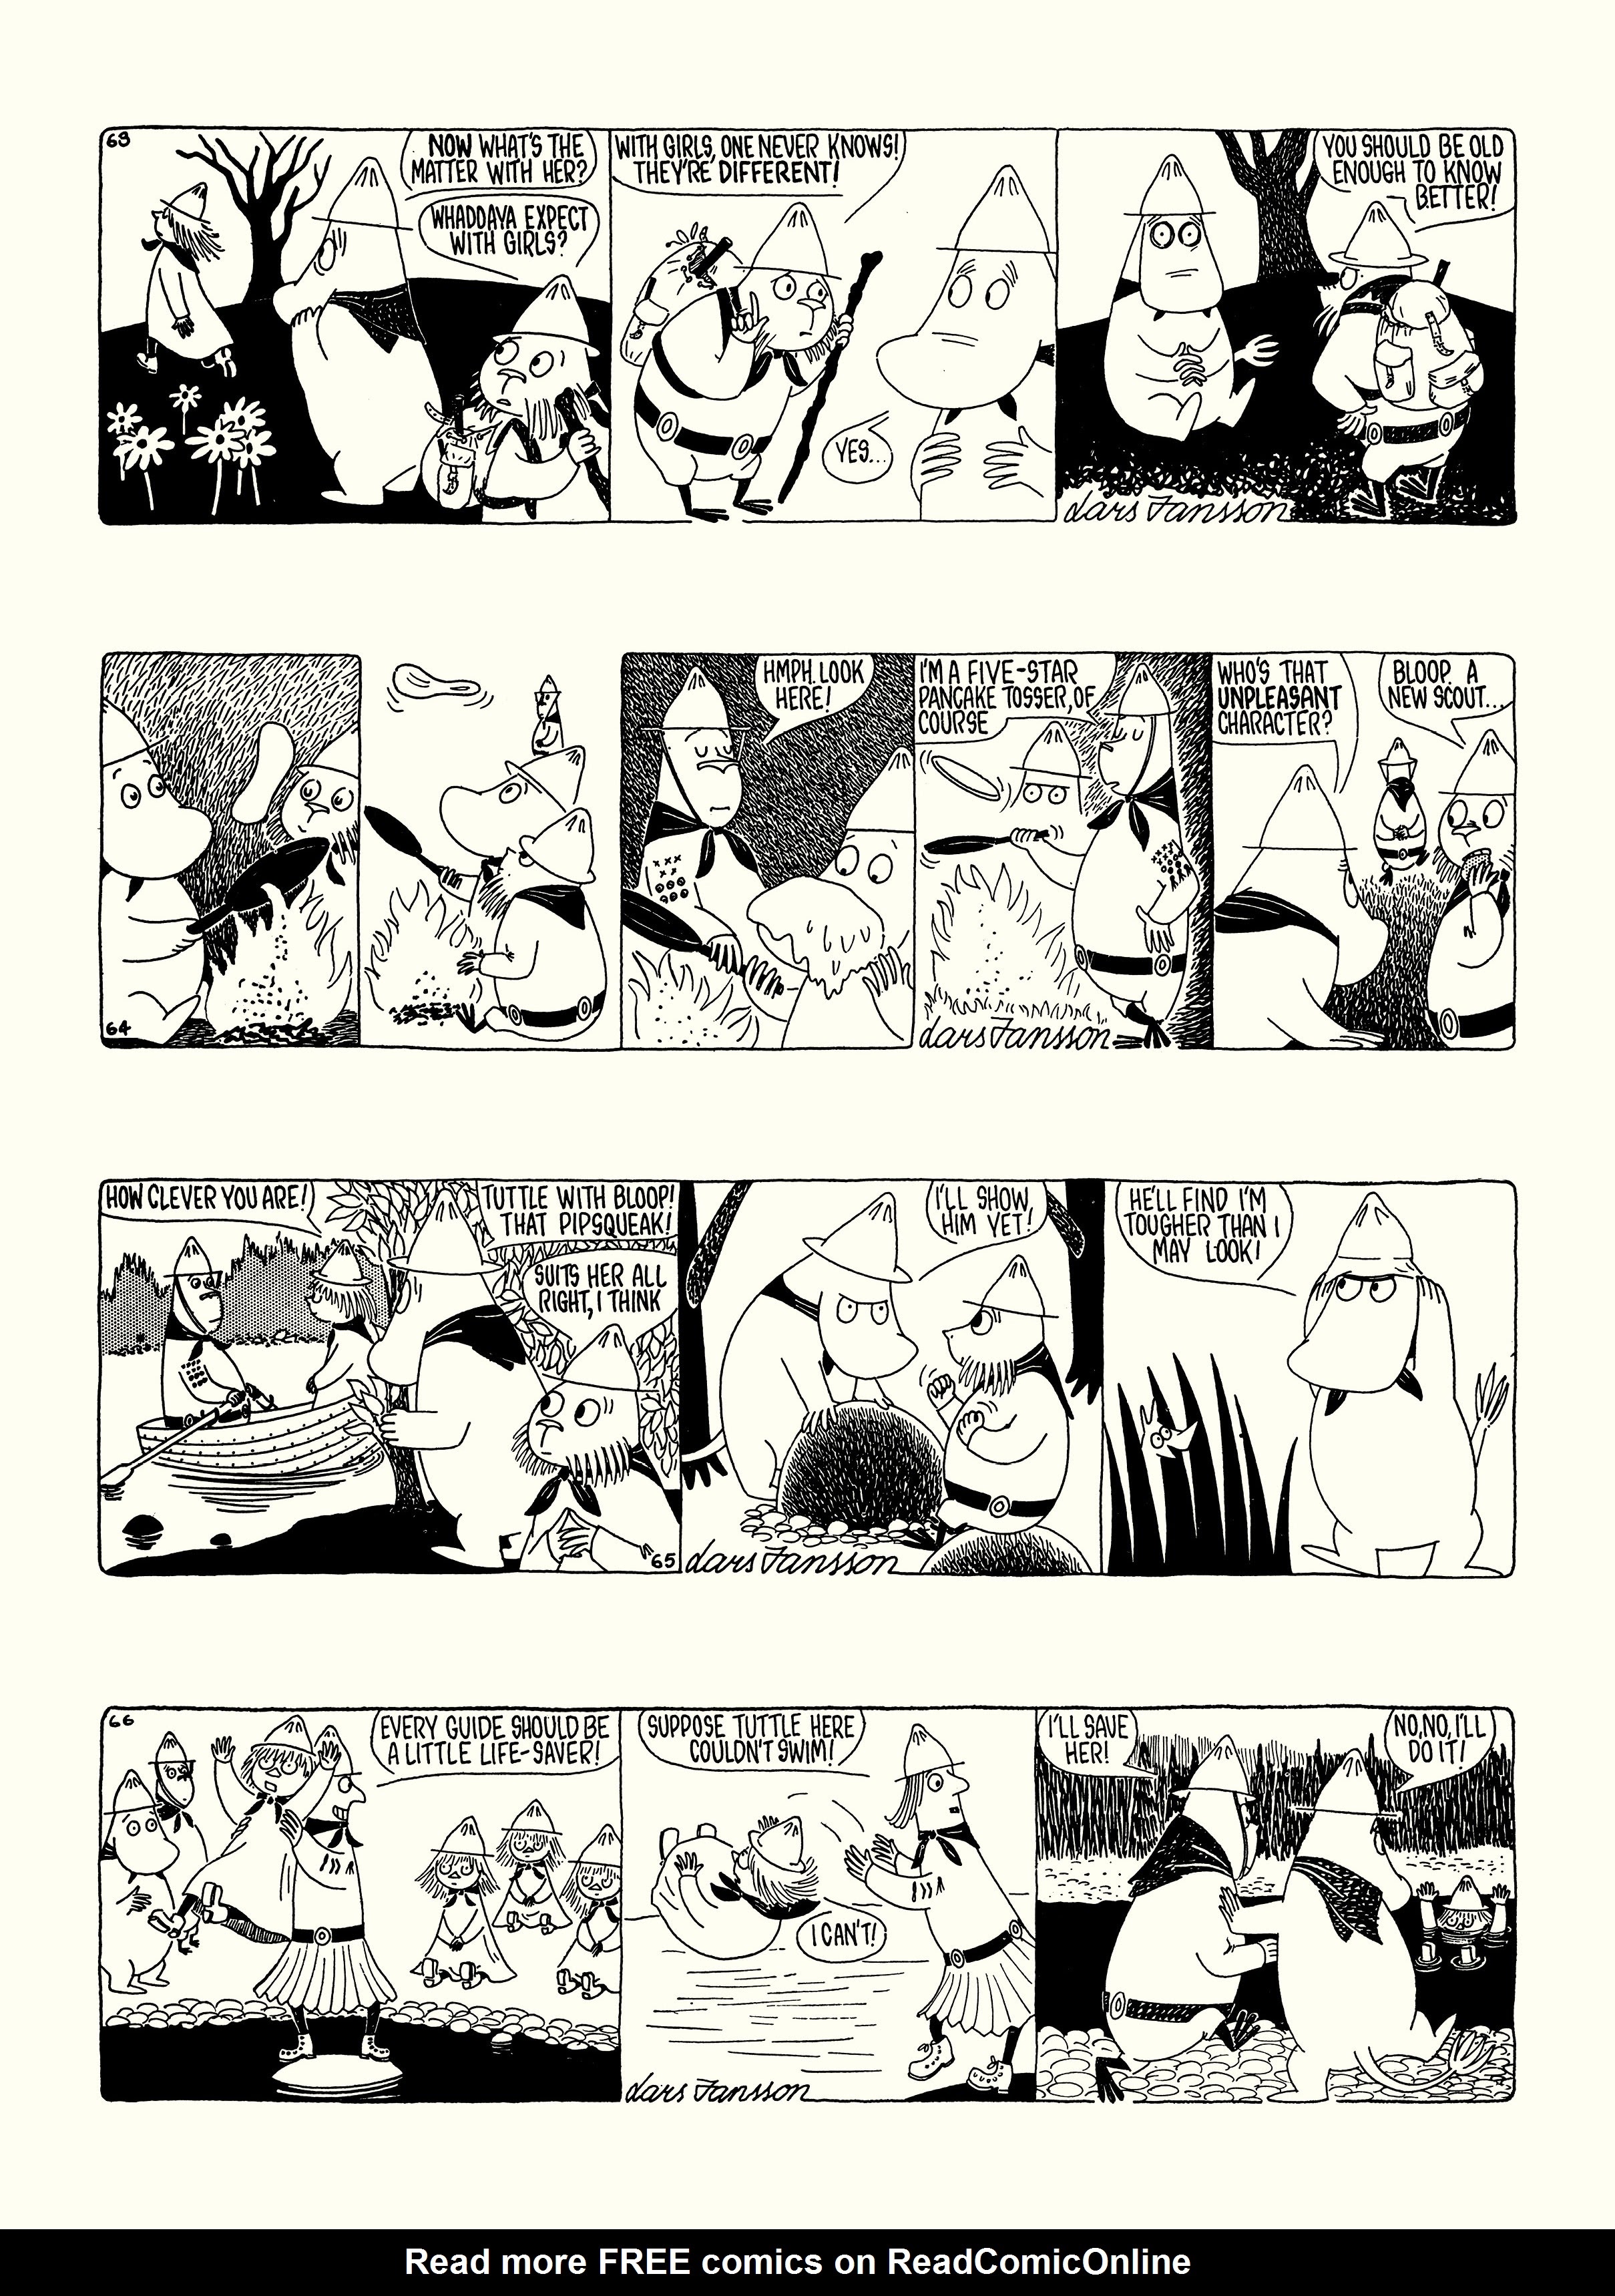 Read online Moomin: The Complete Lars Jansson Comic Strip comic -  Issue # TPB 7 - 43